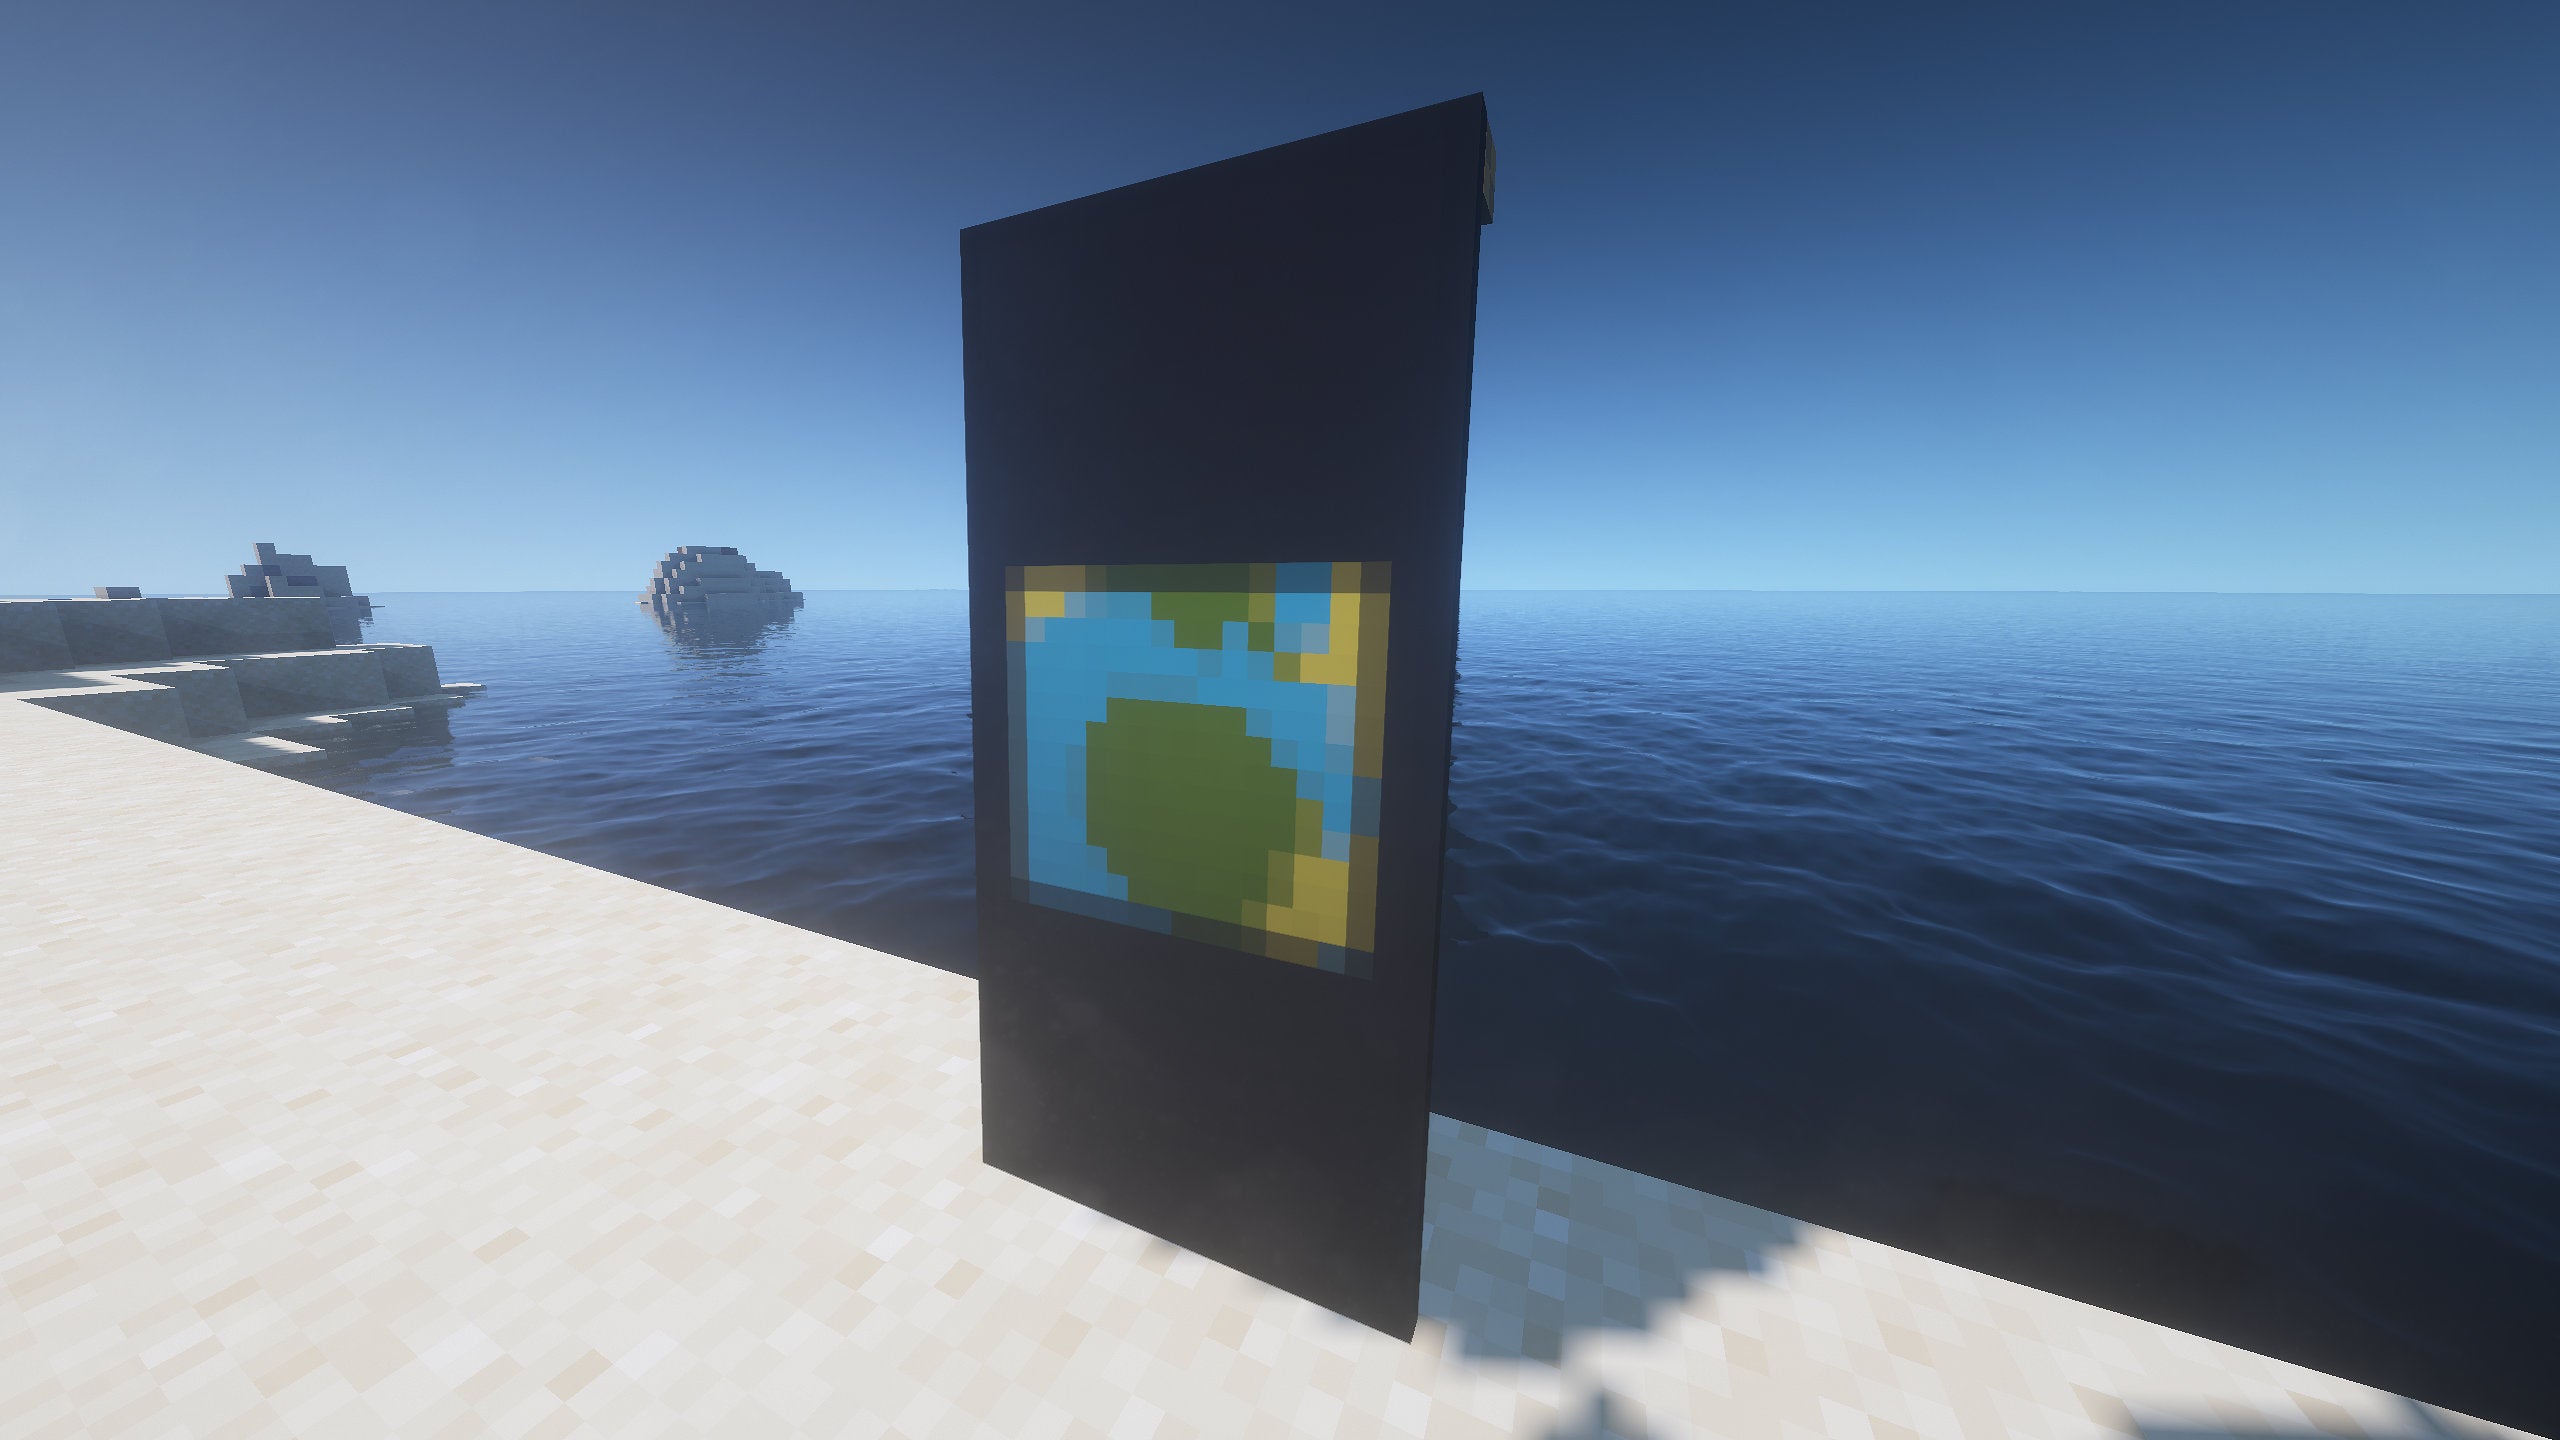 A planet Banner in Minecraft, placed in the ground by the coast.